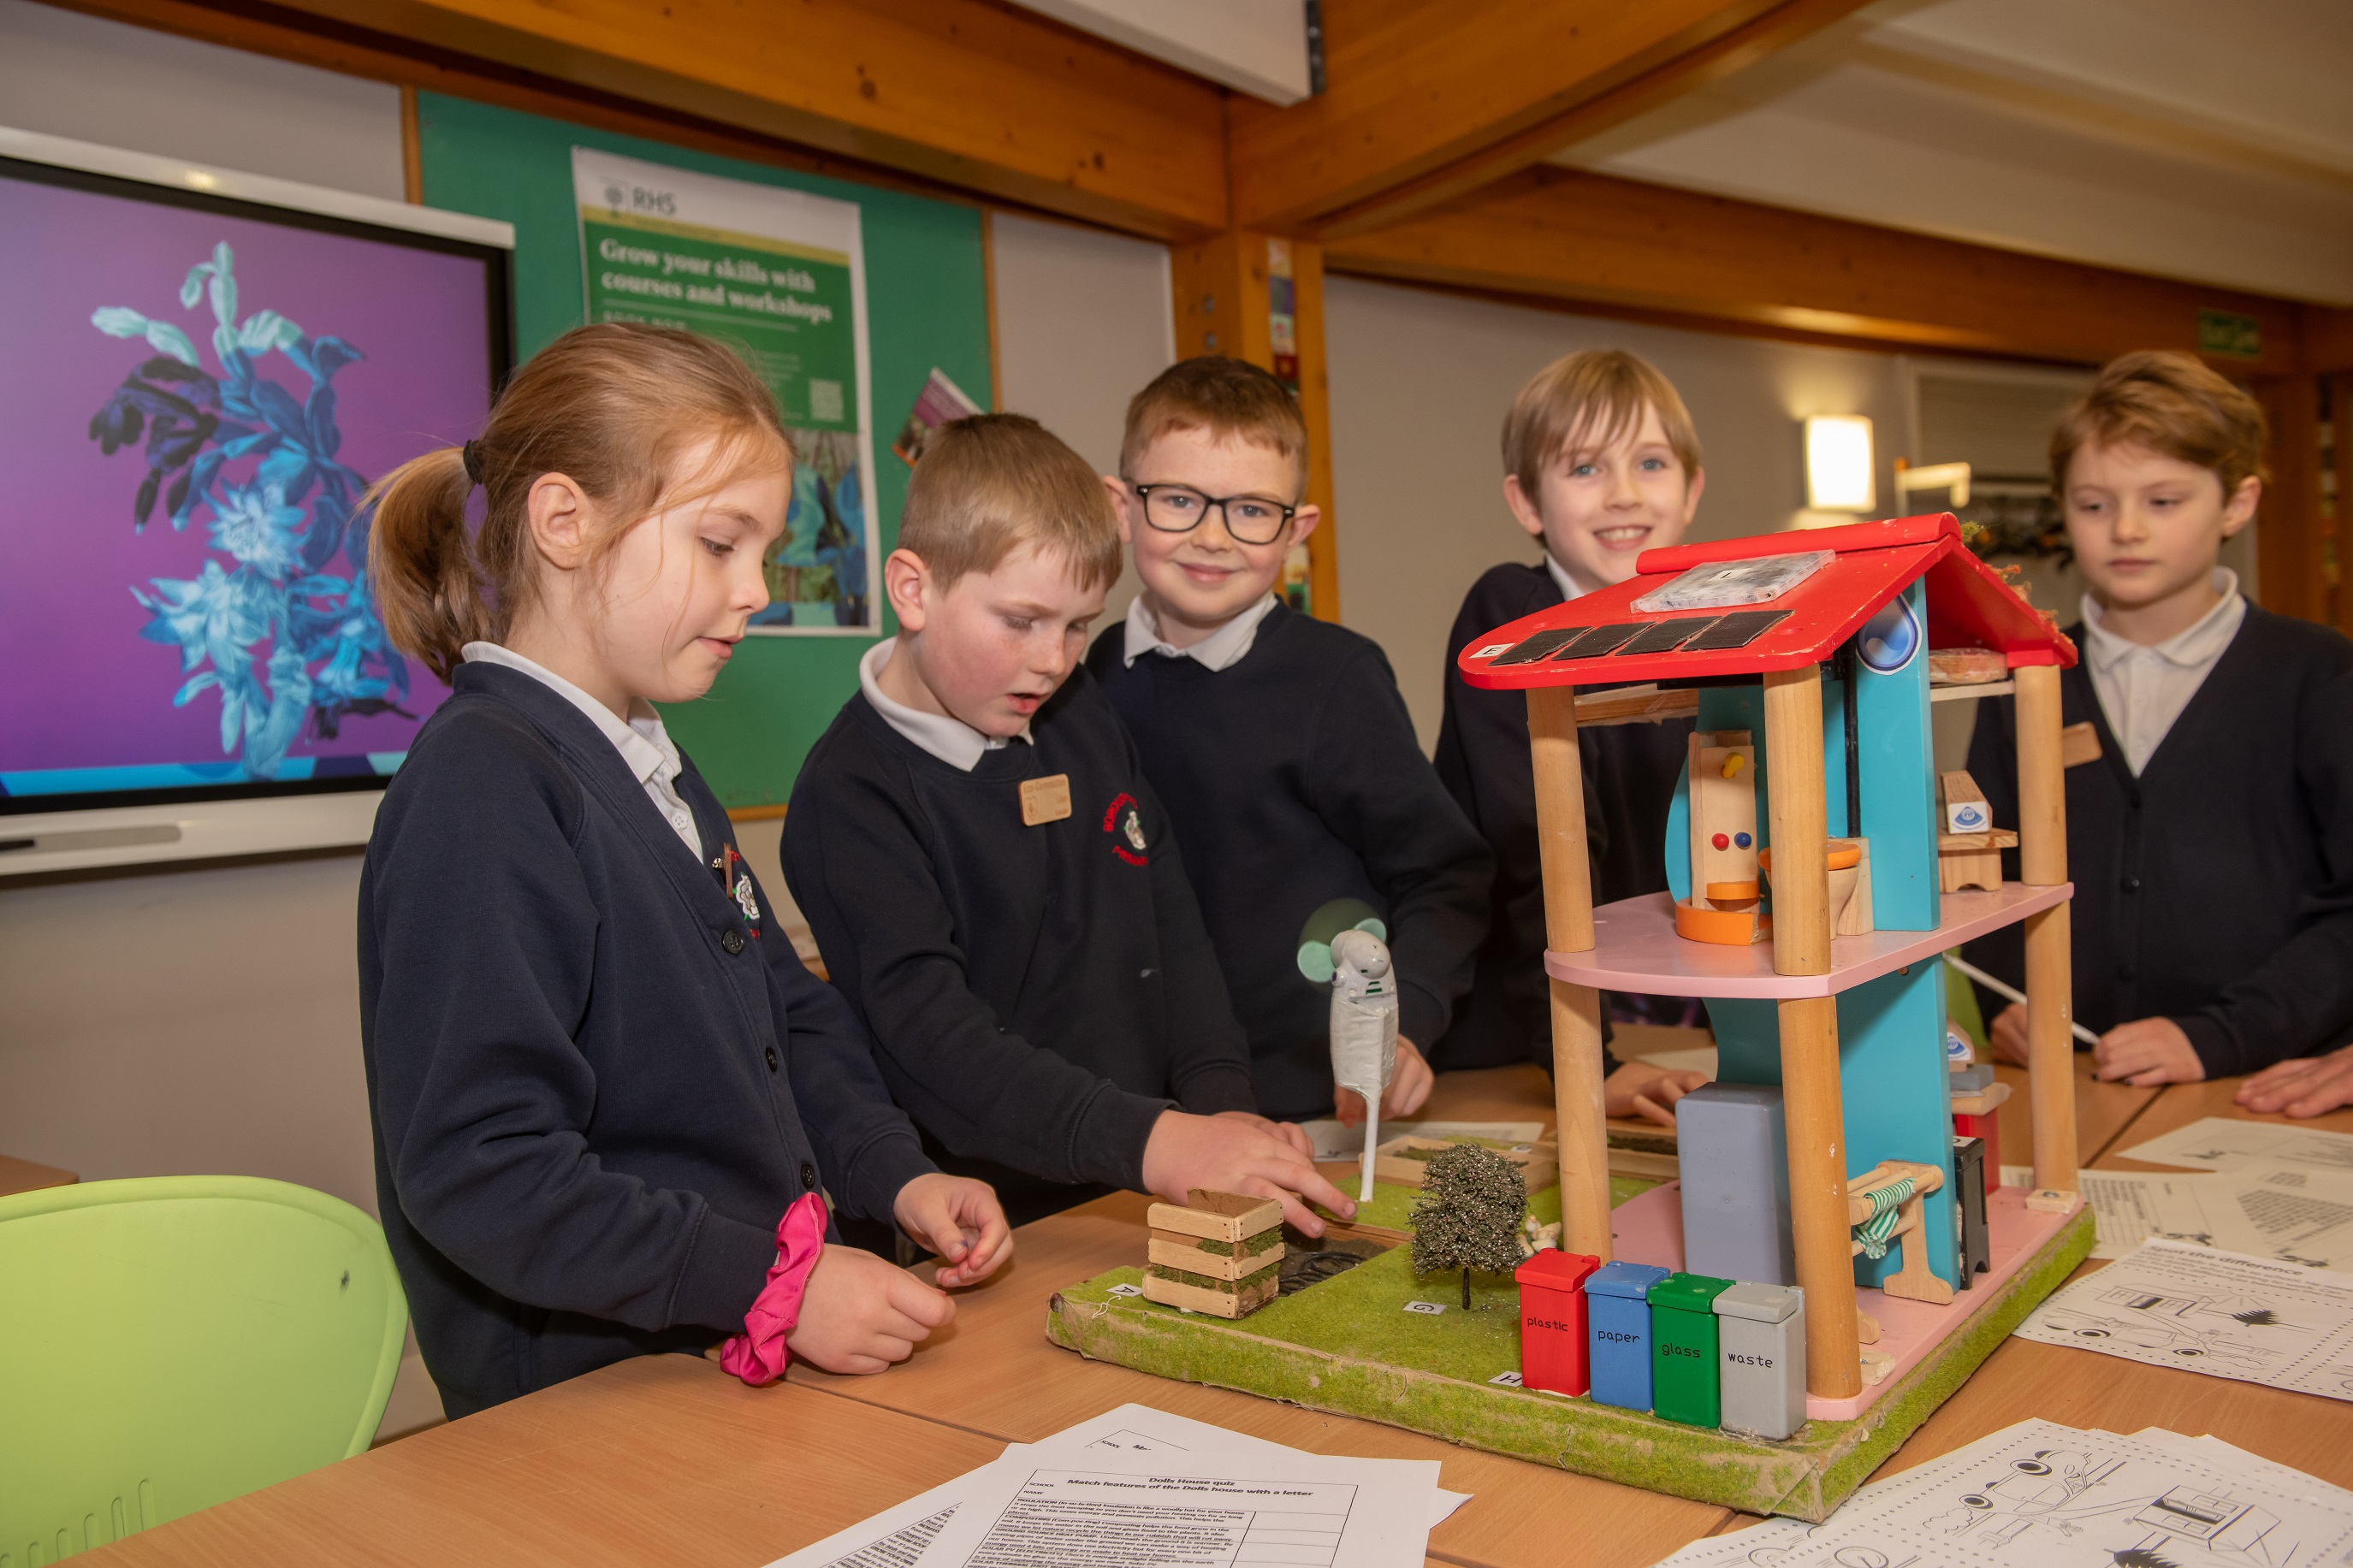 Boroughbridge Primary School pupils who were awarded with the coveted Eco-Schools Green Flag Award for their commitment to sustainability and climate change enjoy the activities held. 